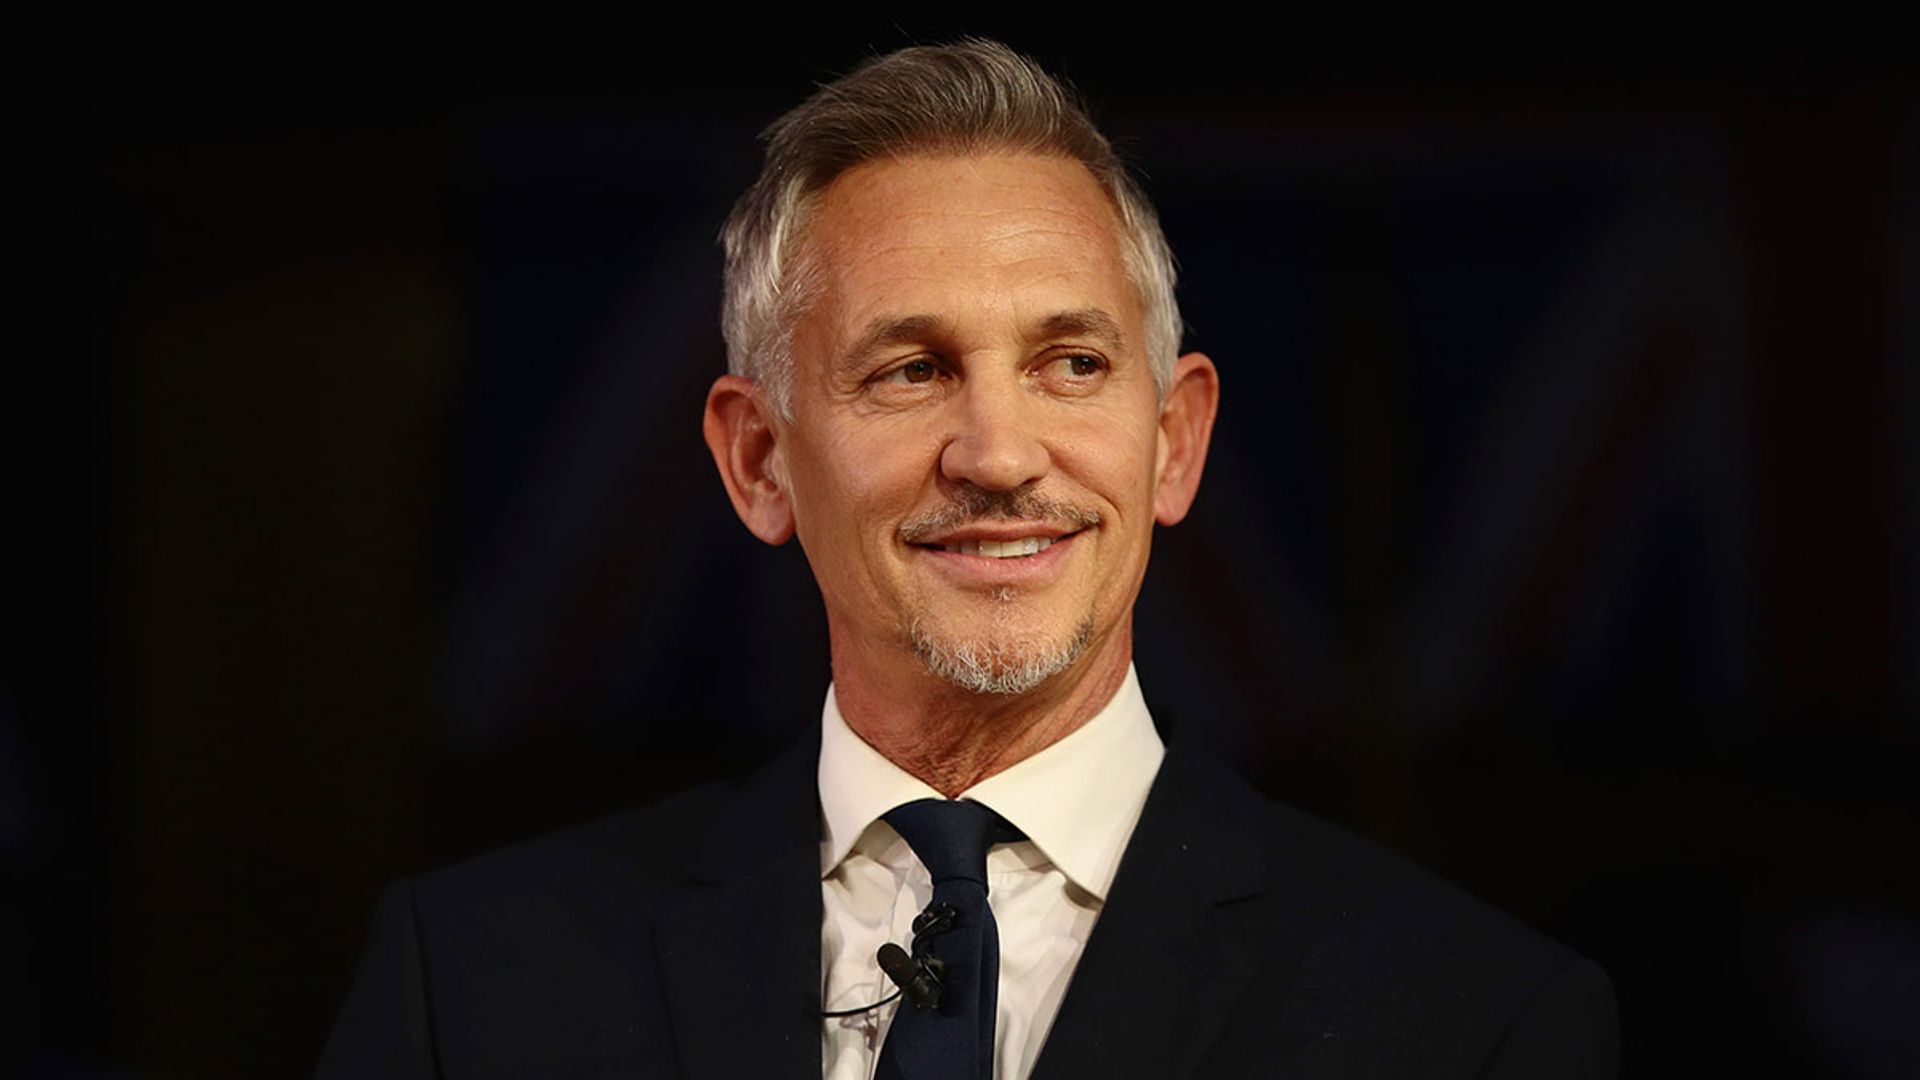 Gary Lineker announces huge news: 'It's time to do things that I've always promised myself I'd do'